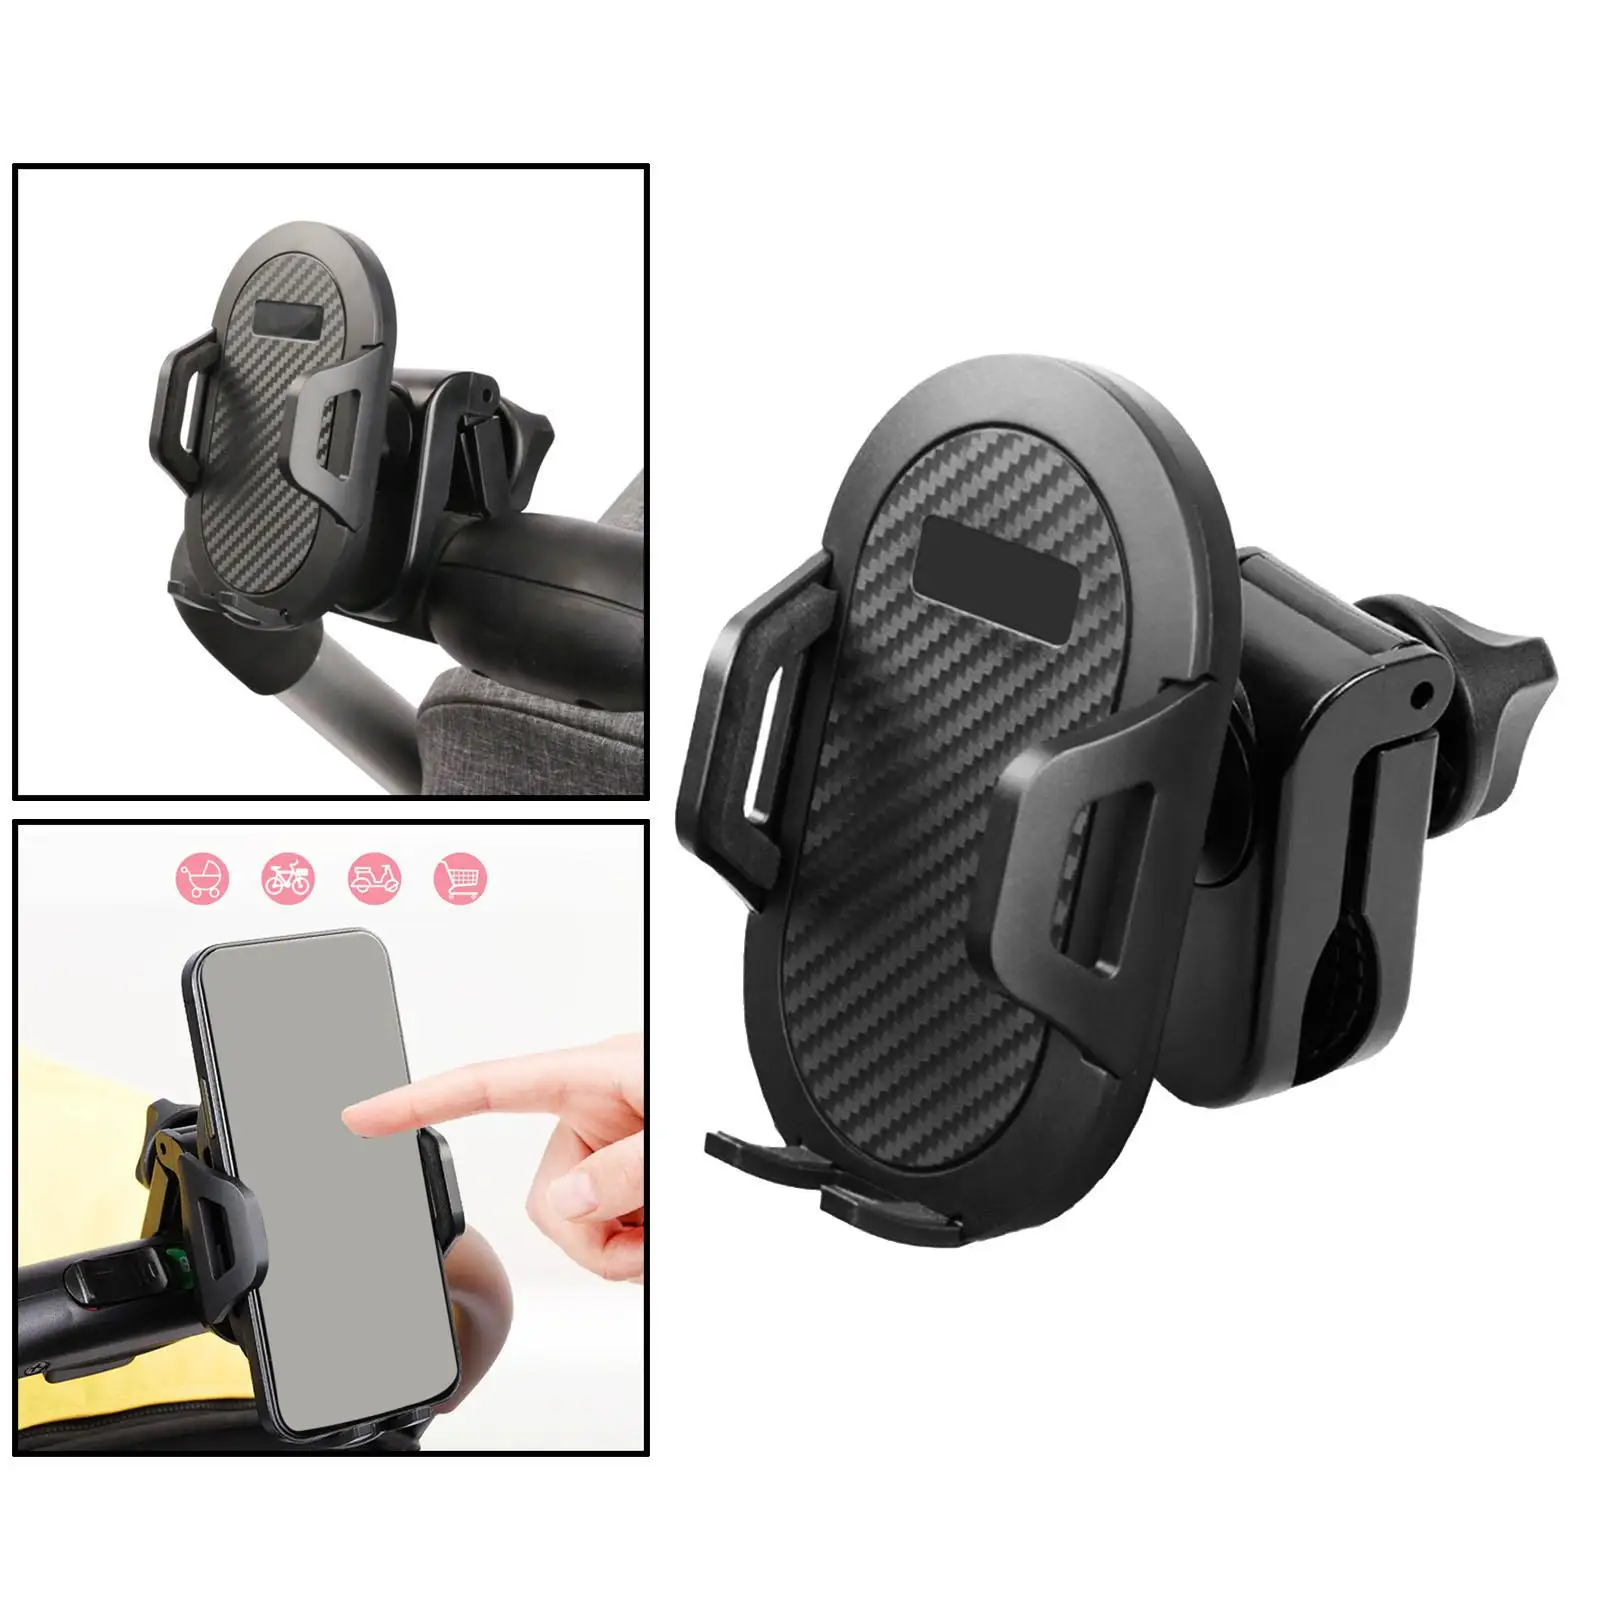 Universal Baby Stroller Cell Phone Holder 360 Degree Rotate Bicycle Phone Stander for Bicycle Carriage Cart Infant Stroller Pram